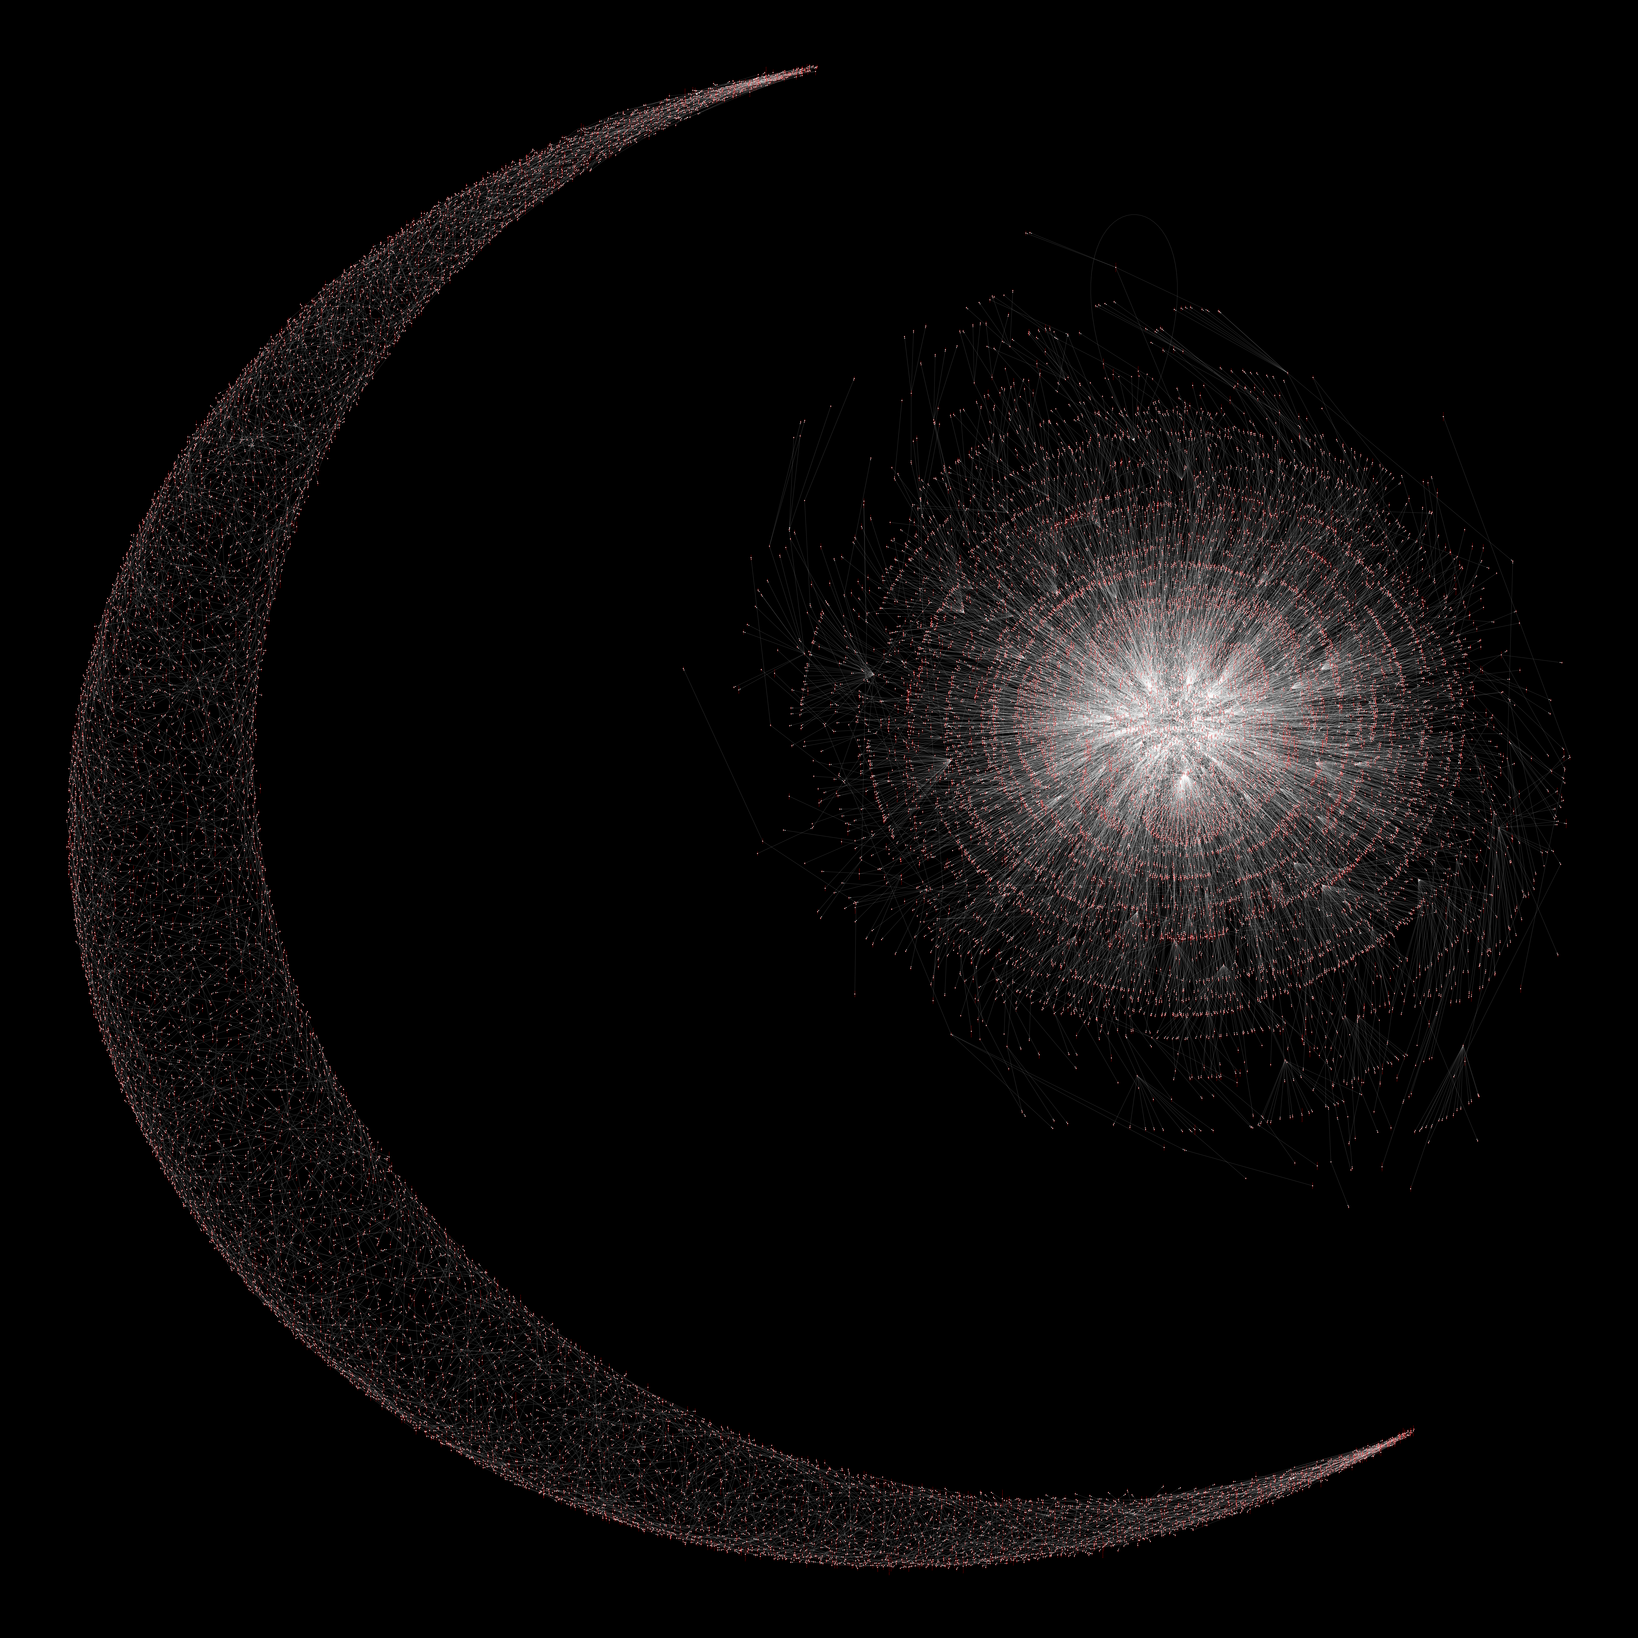 Star and crescent formed by Kamada-Kawai on 20,000 names